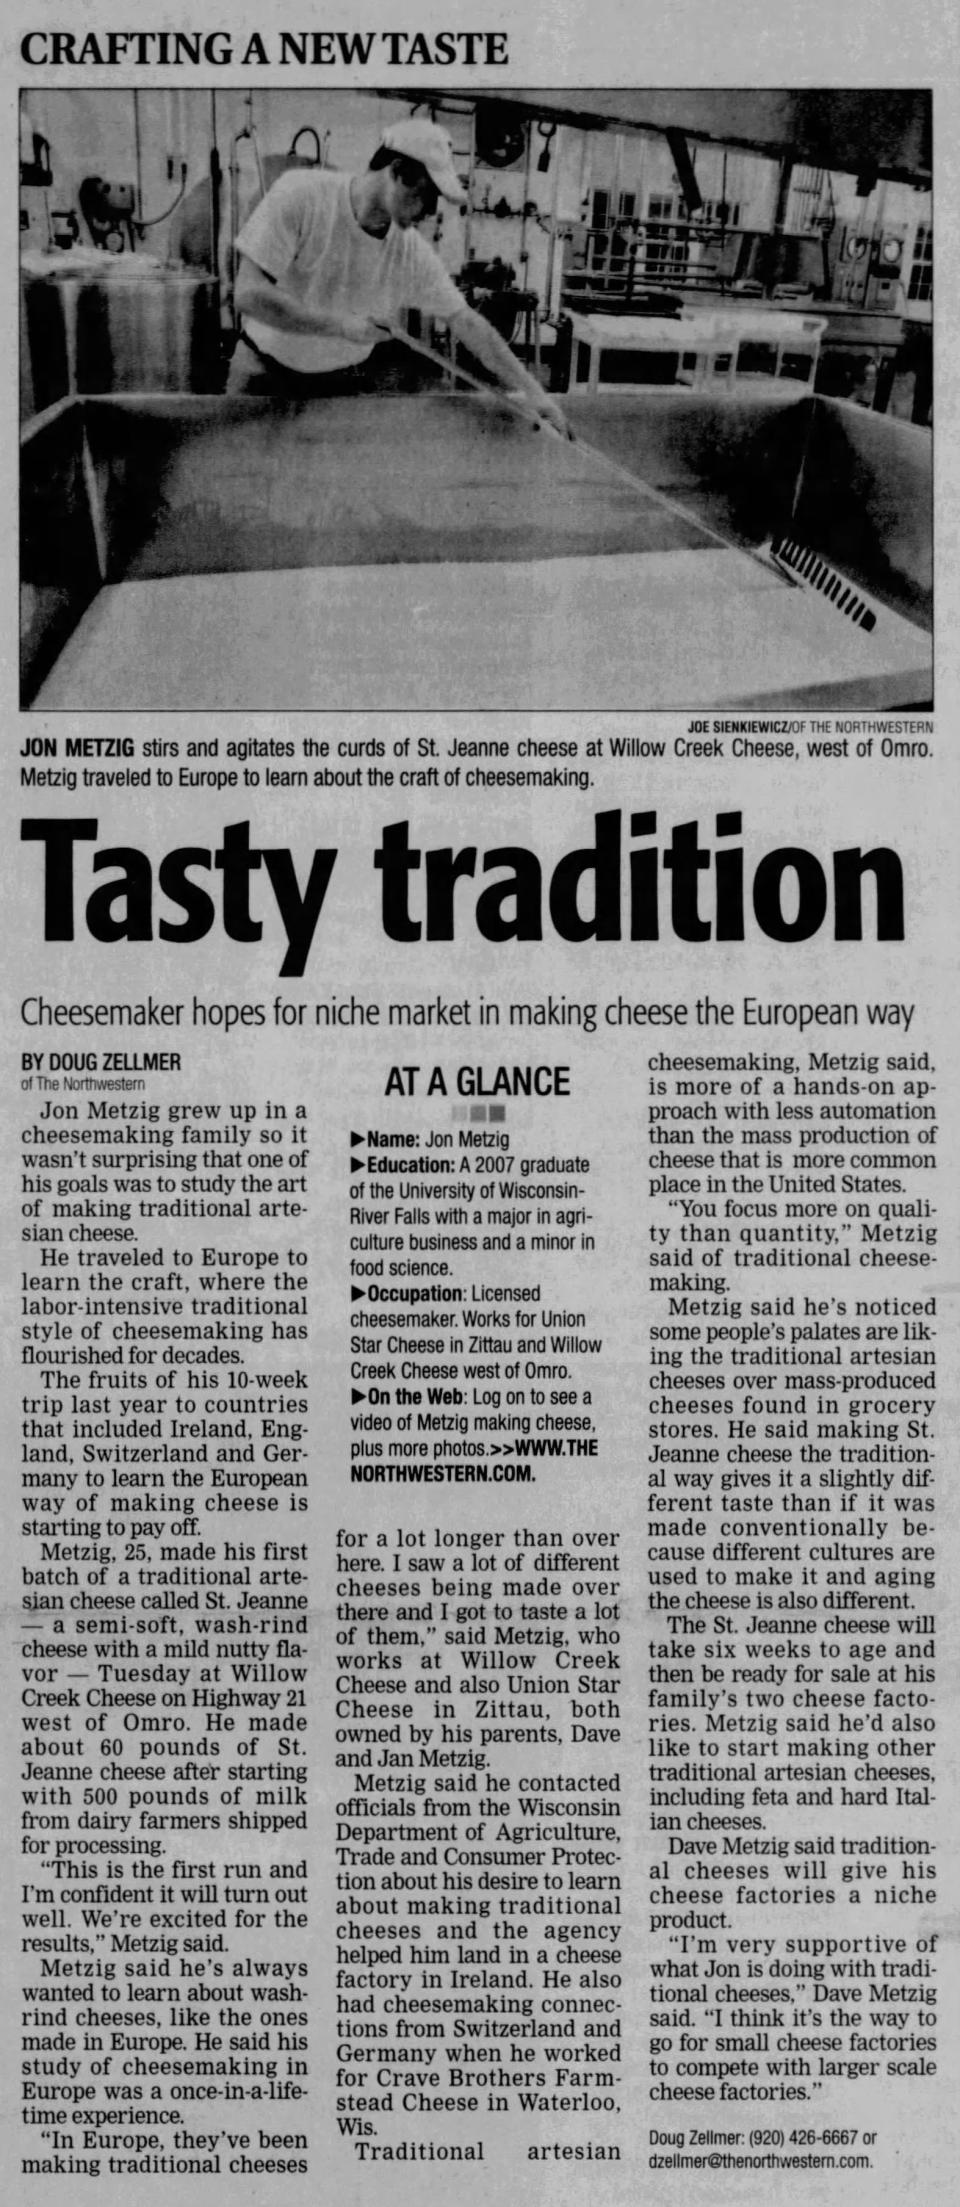 Jon Metzig is featured in a Jan. 17, 2010, article about "making cheese the European way." He was 25 at the time and had just developed his first batch of St. Jeanne cheese.